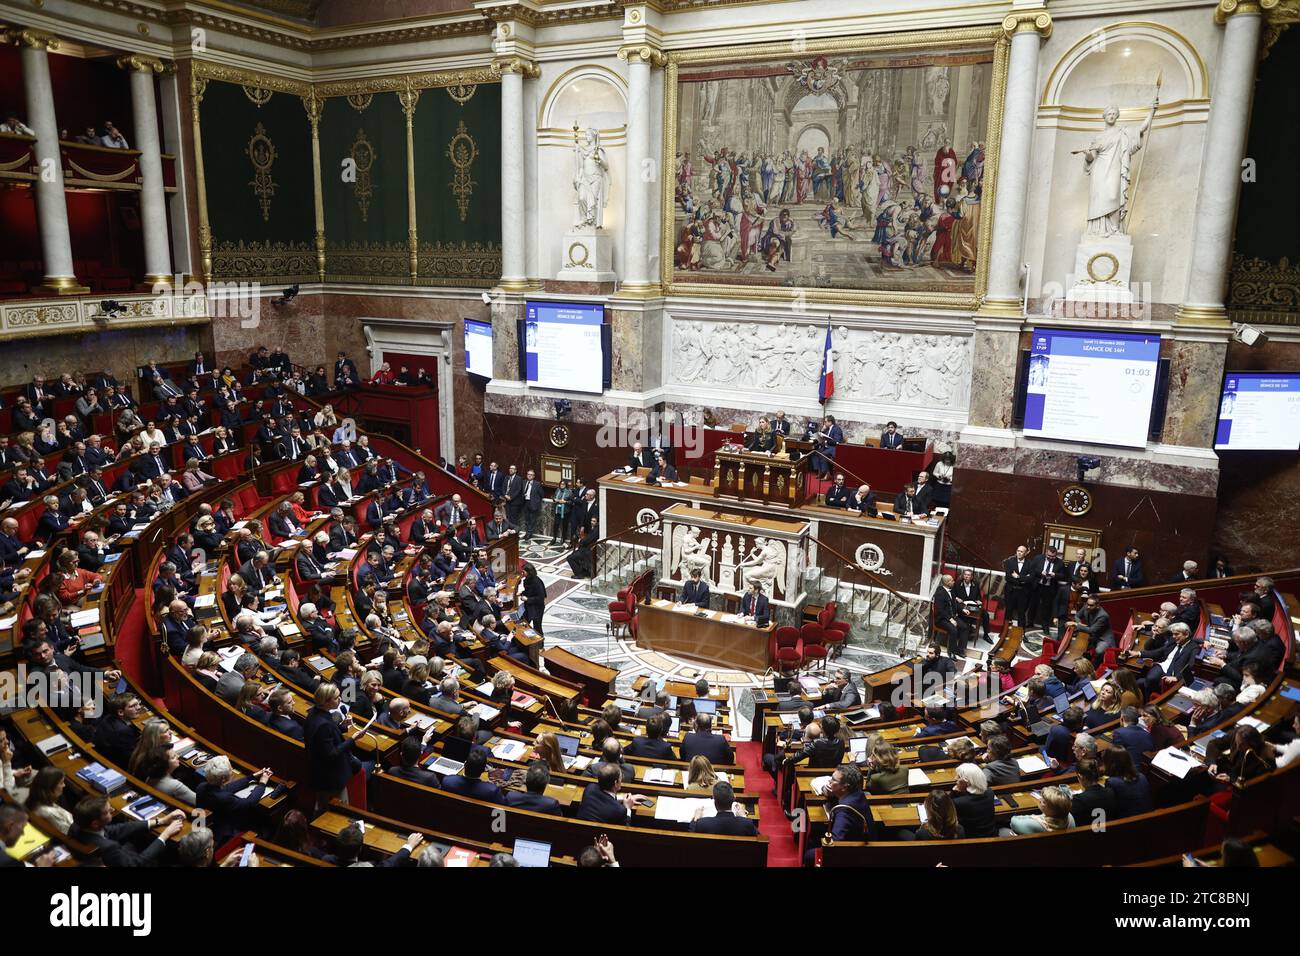 Paris France 11th Dec 2023 General View During Debate On The Draft Law To Control Immigration At The National Assembly In Paris France On December 11 2023 Photo By Raphael Lafargueabacapresscom Credit Abaca Pressalamy Live News 2TC8BNJ 